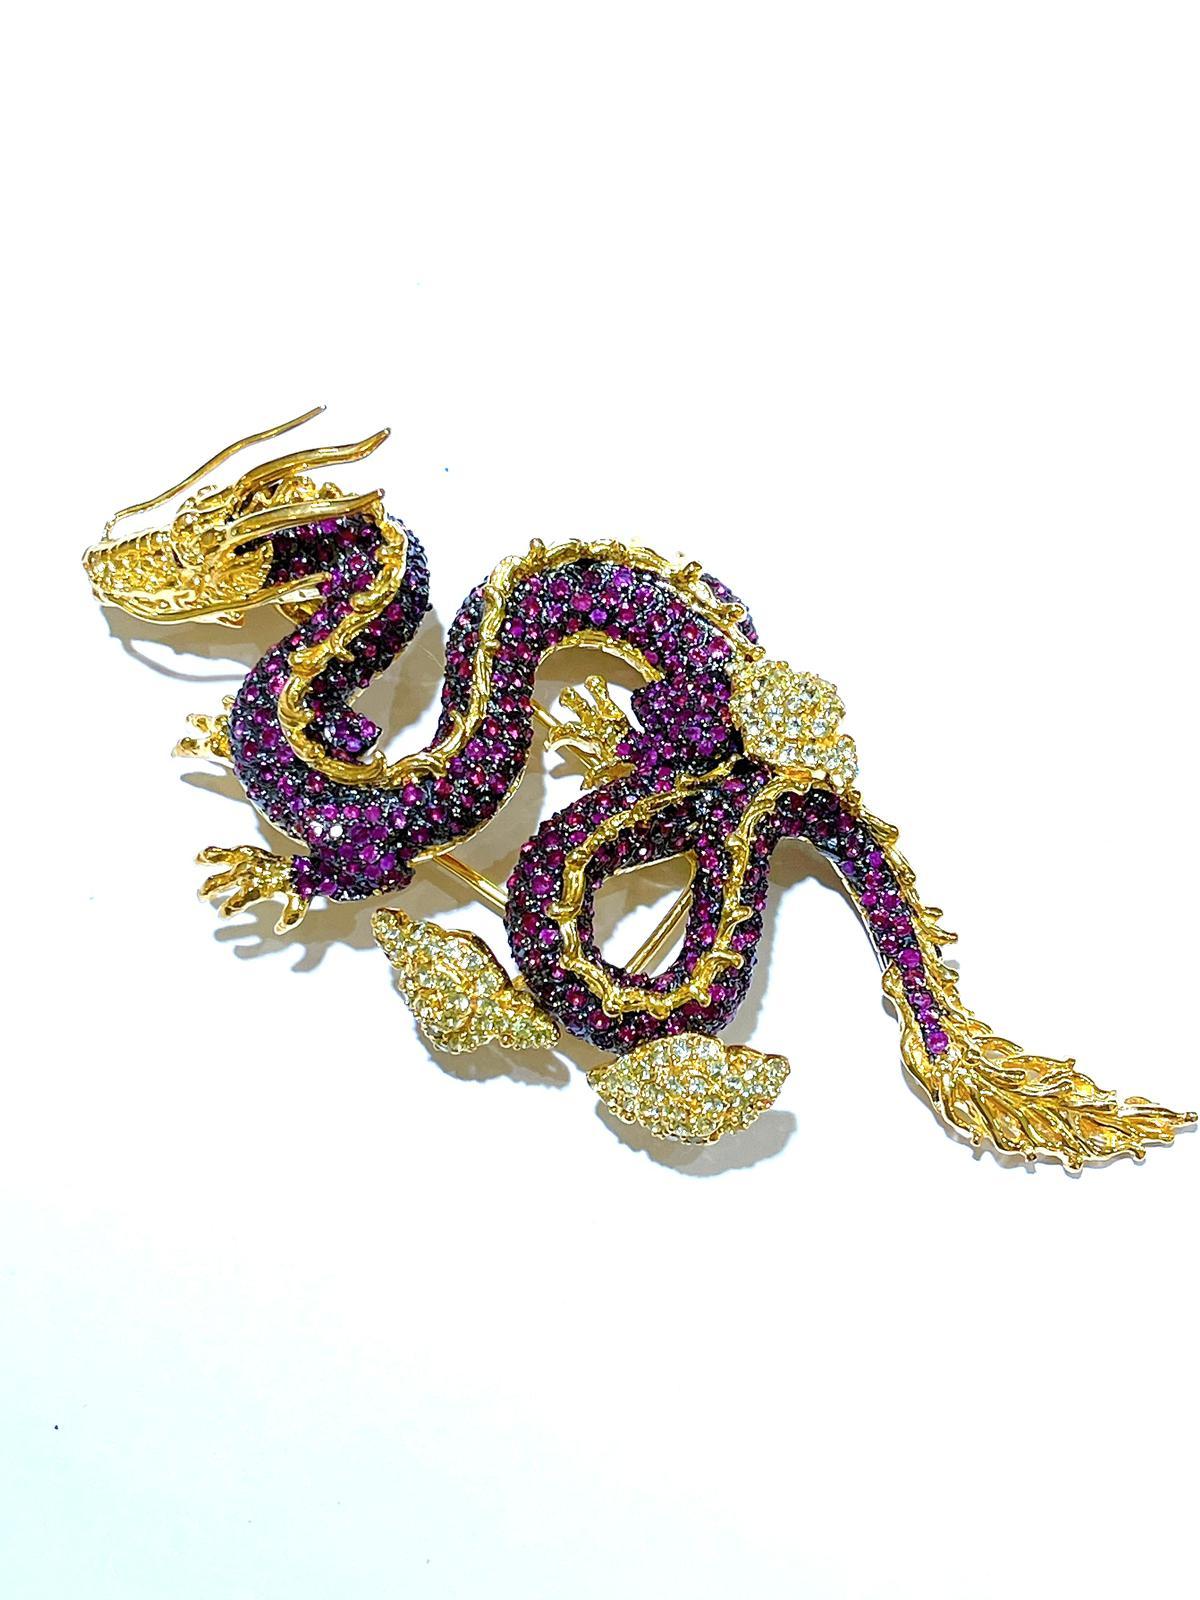 Bochic Dragon “Orient” Ruby & White Zircon Brooch In 18K Gold & Silver 

Natural Ruby  - 9.70 carat 
Natural White Zircon
3 carat


The Brooch is from the 